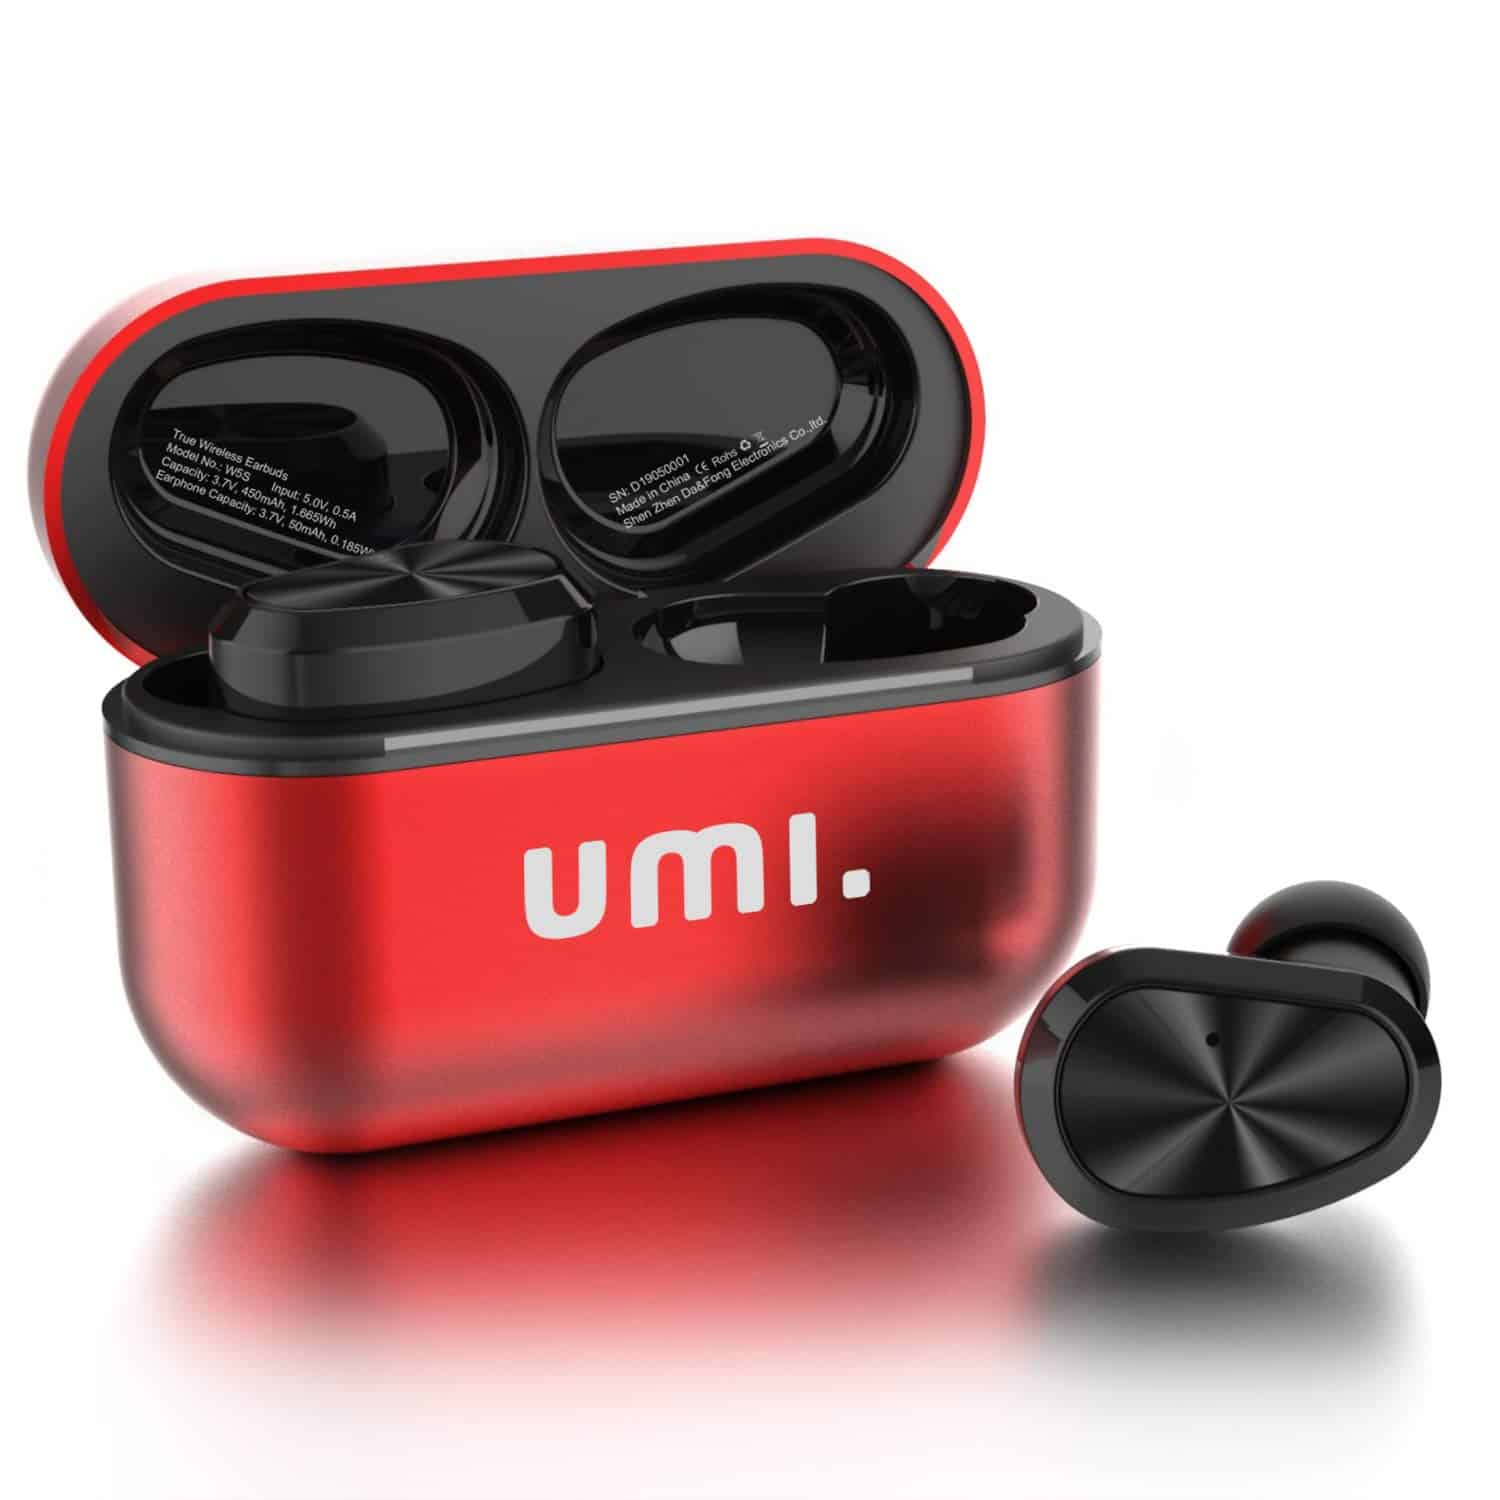 Eono and Umi Gadget essentials for the summer holidays from Amazon